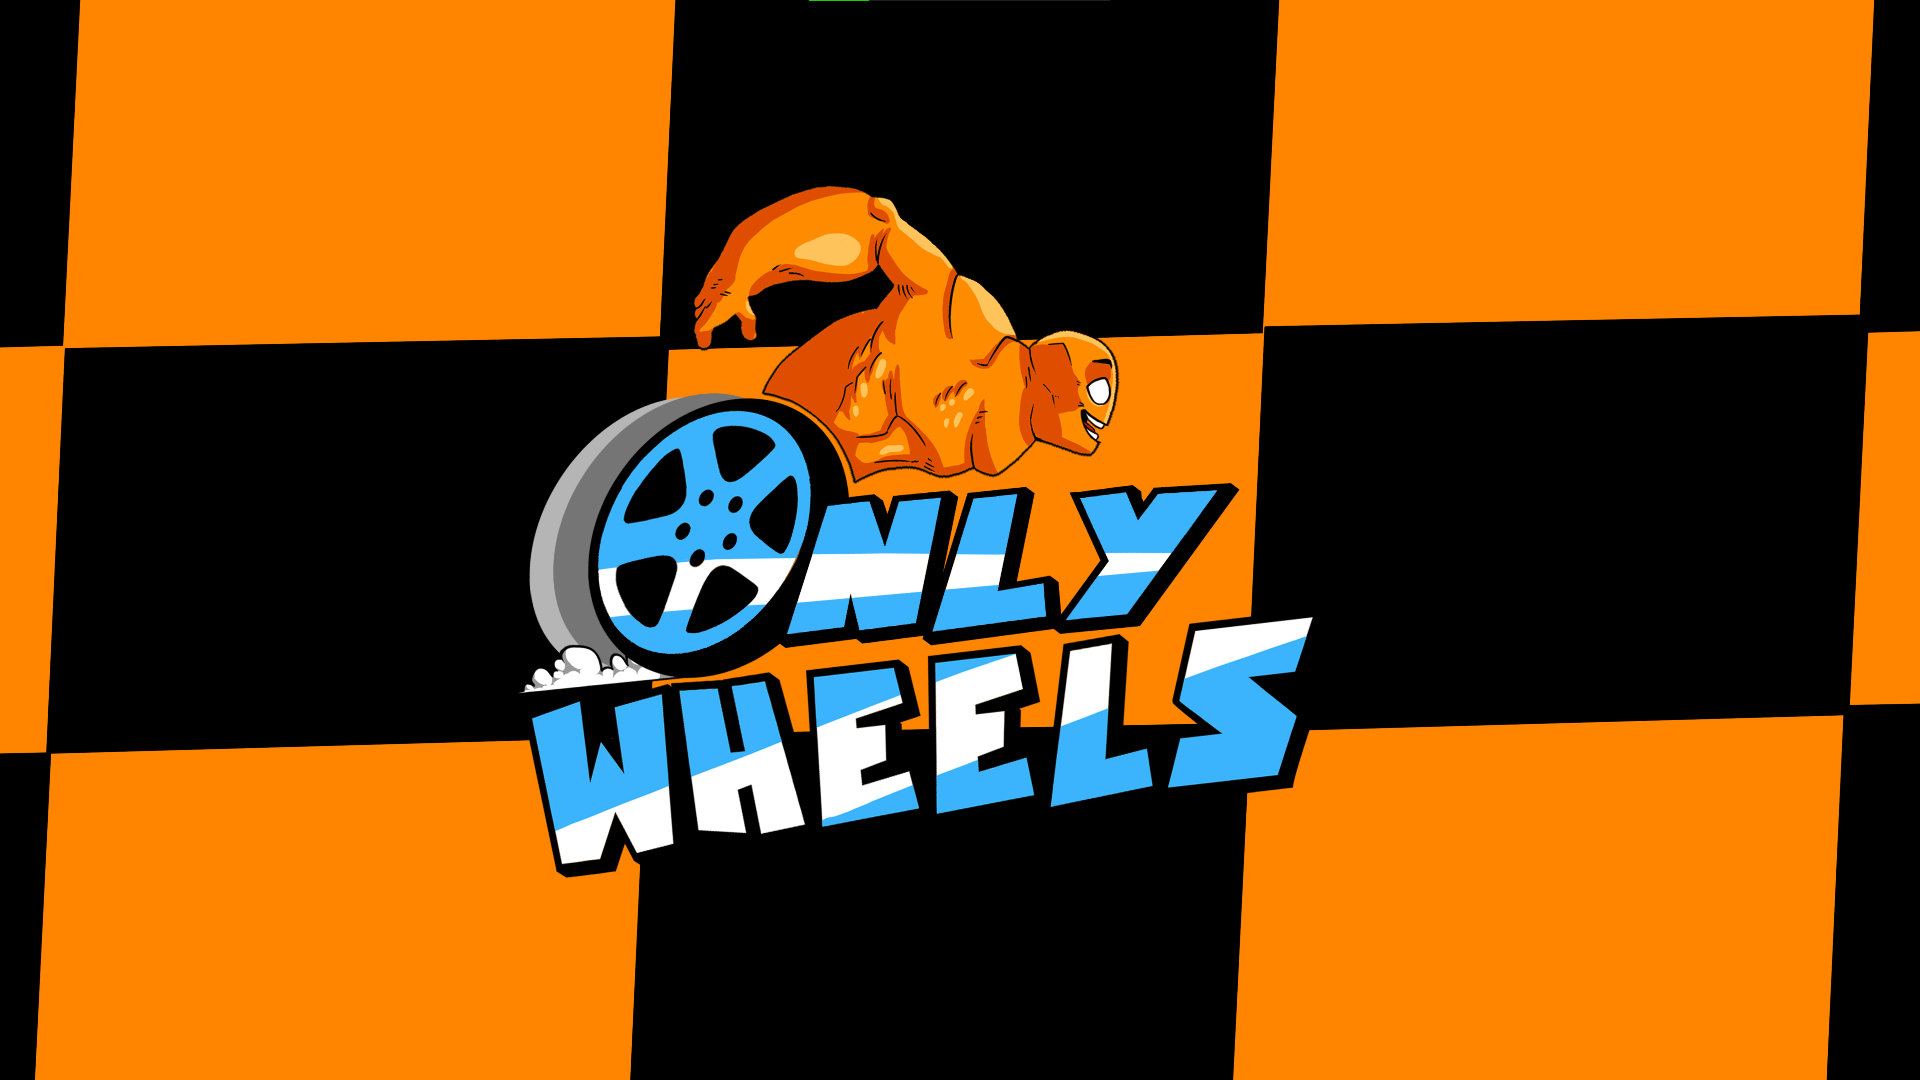 Only wheels